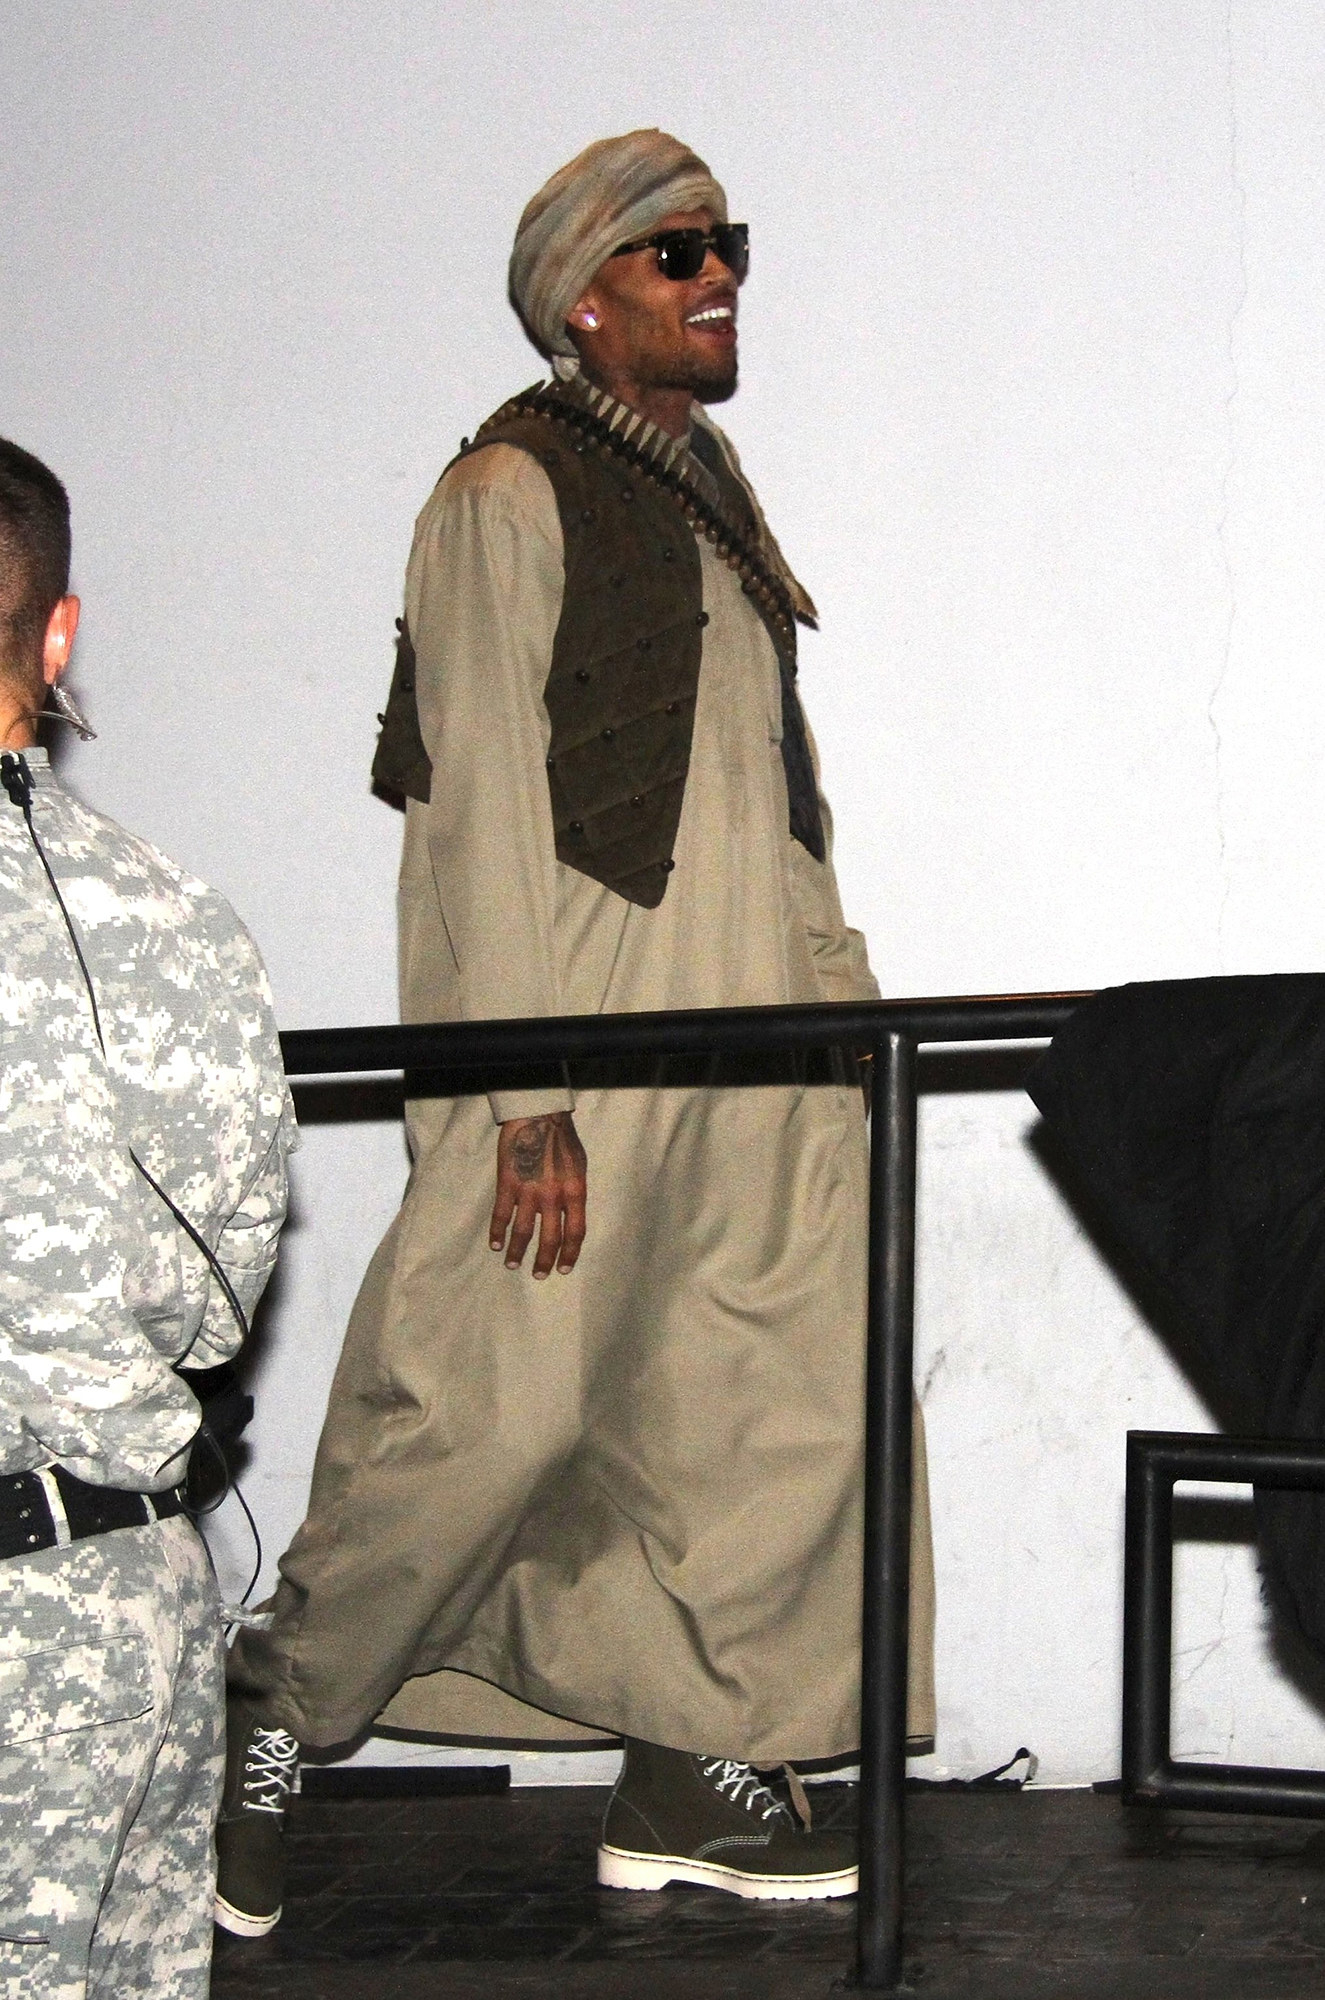 Chris Brown wearing a robe and turban